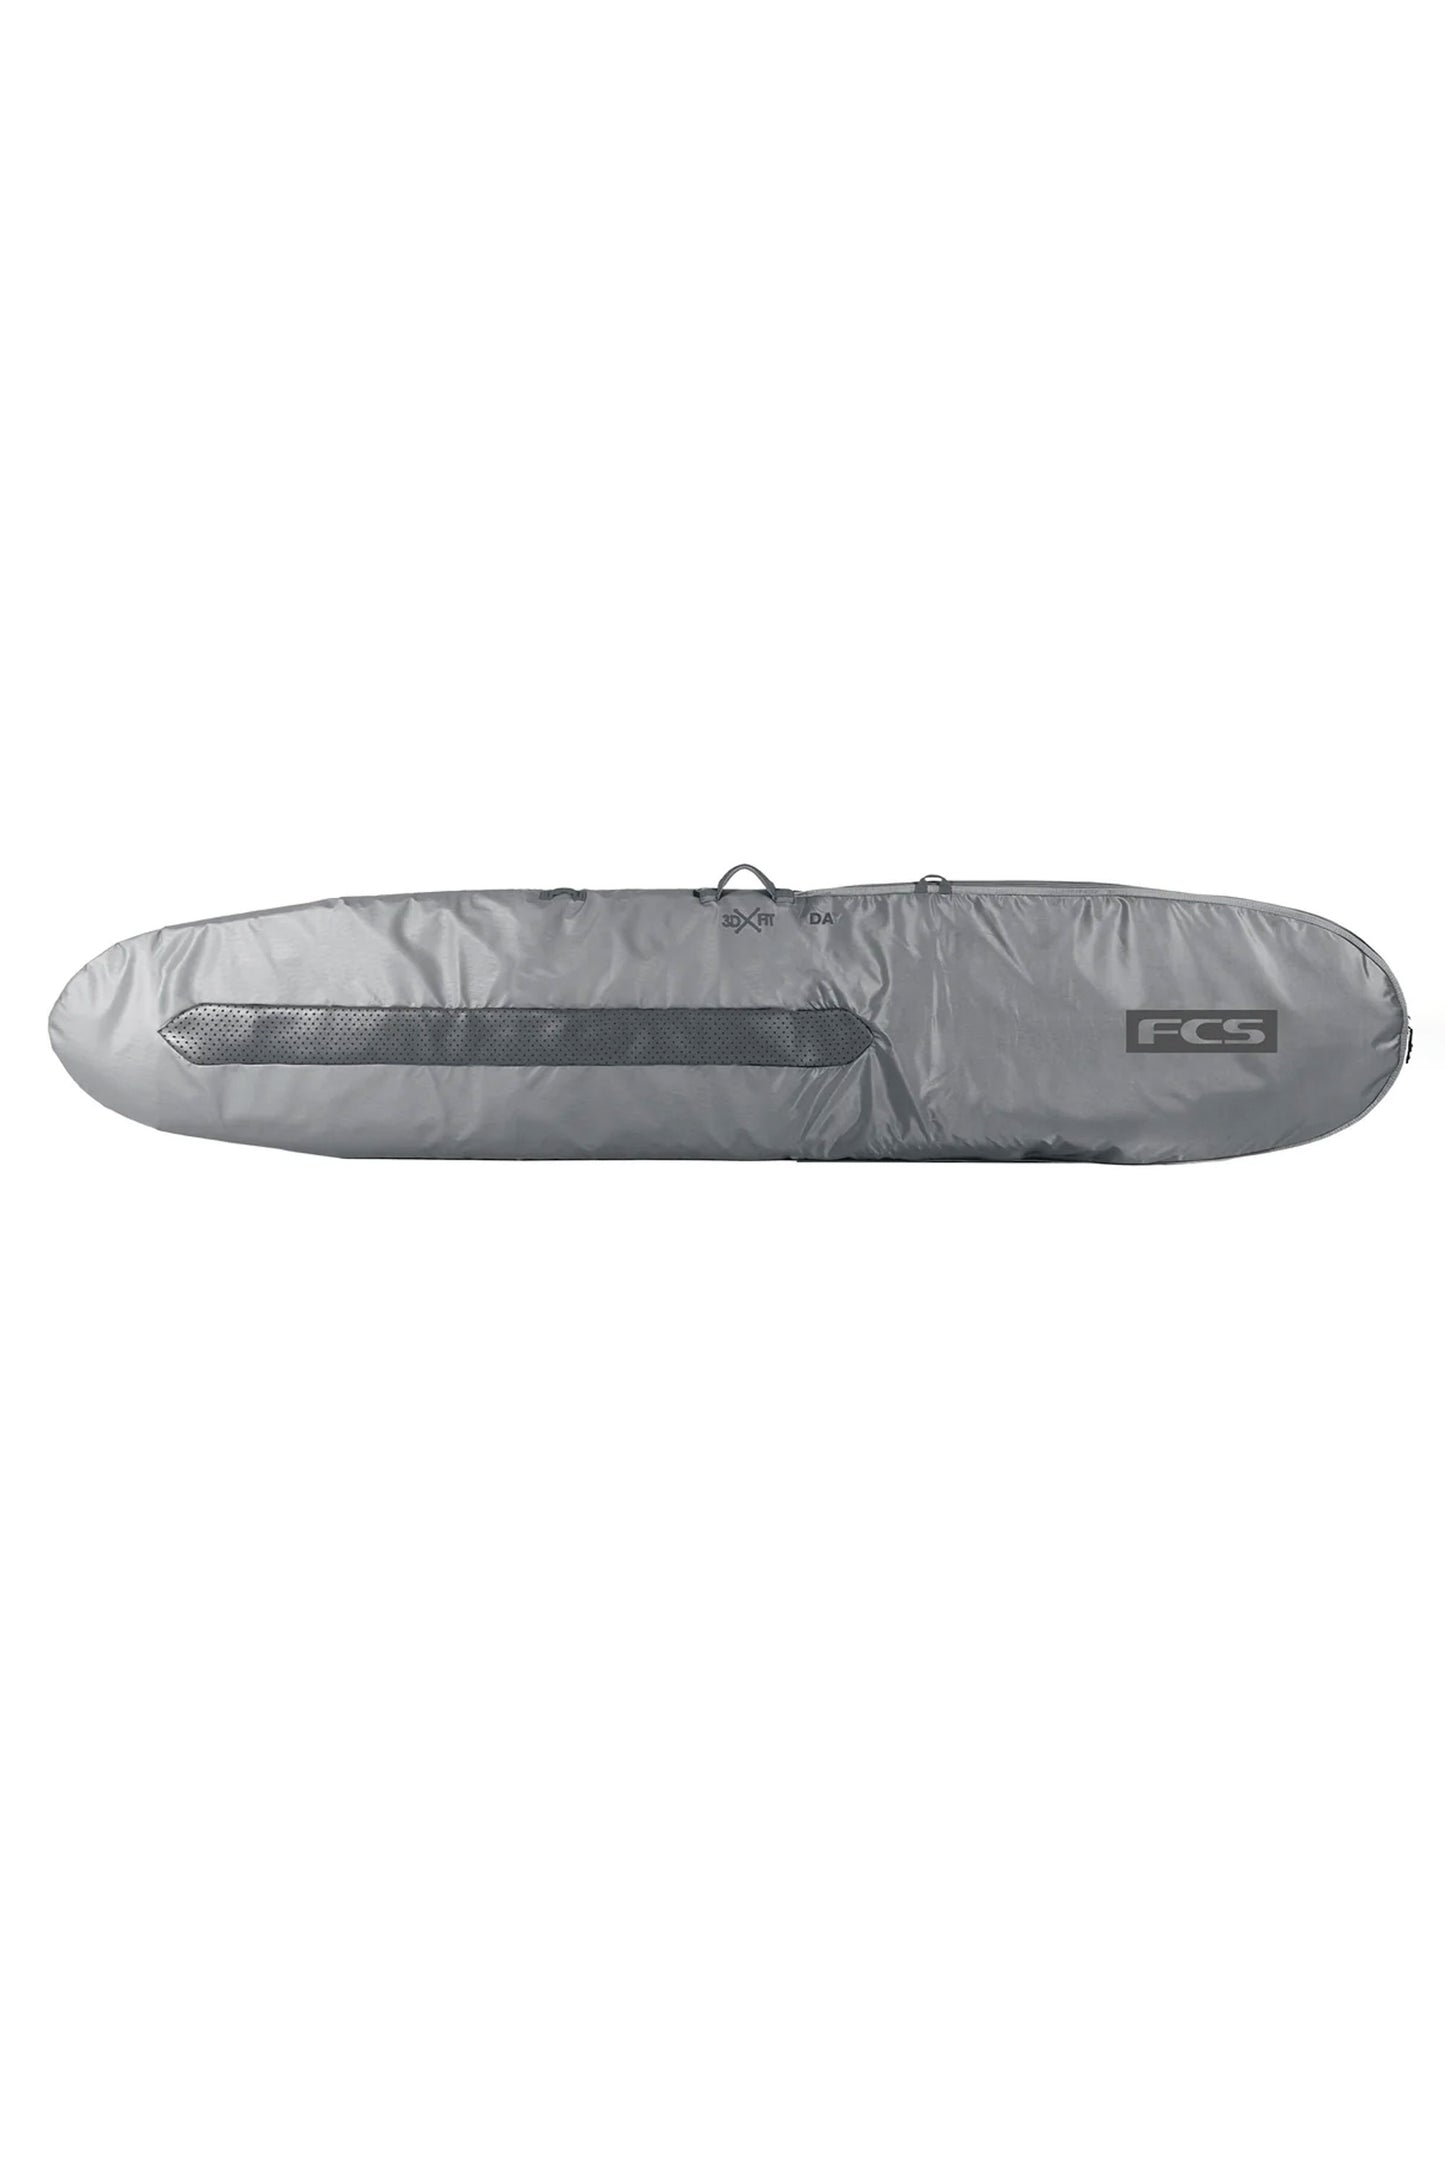 Pukas-Surf-Shop-fcs-day-long-board-cover-steel-grey